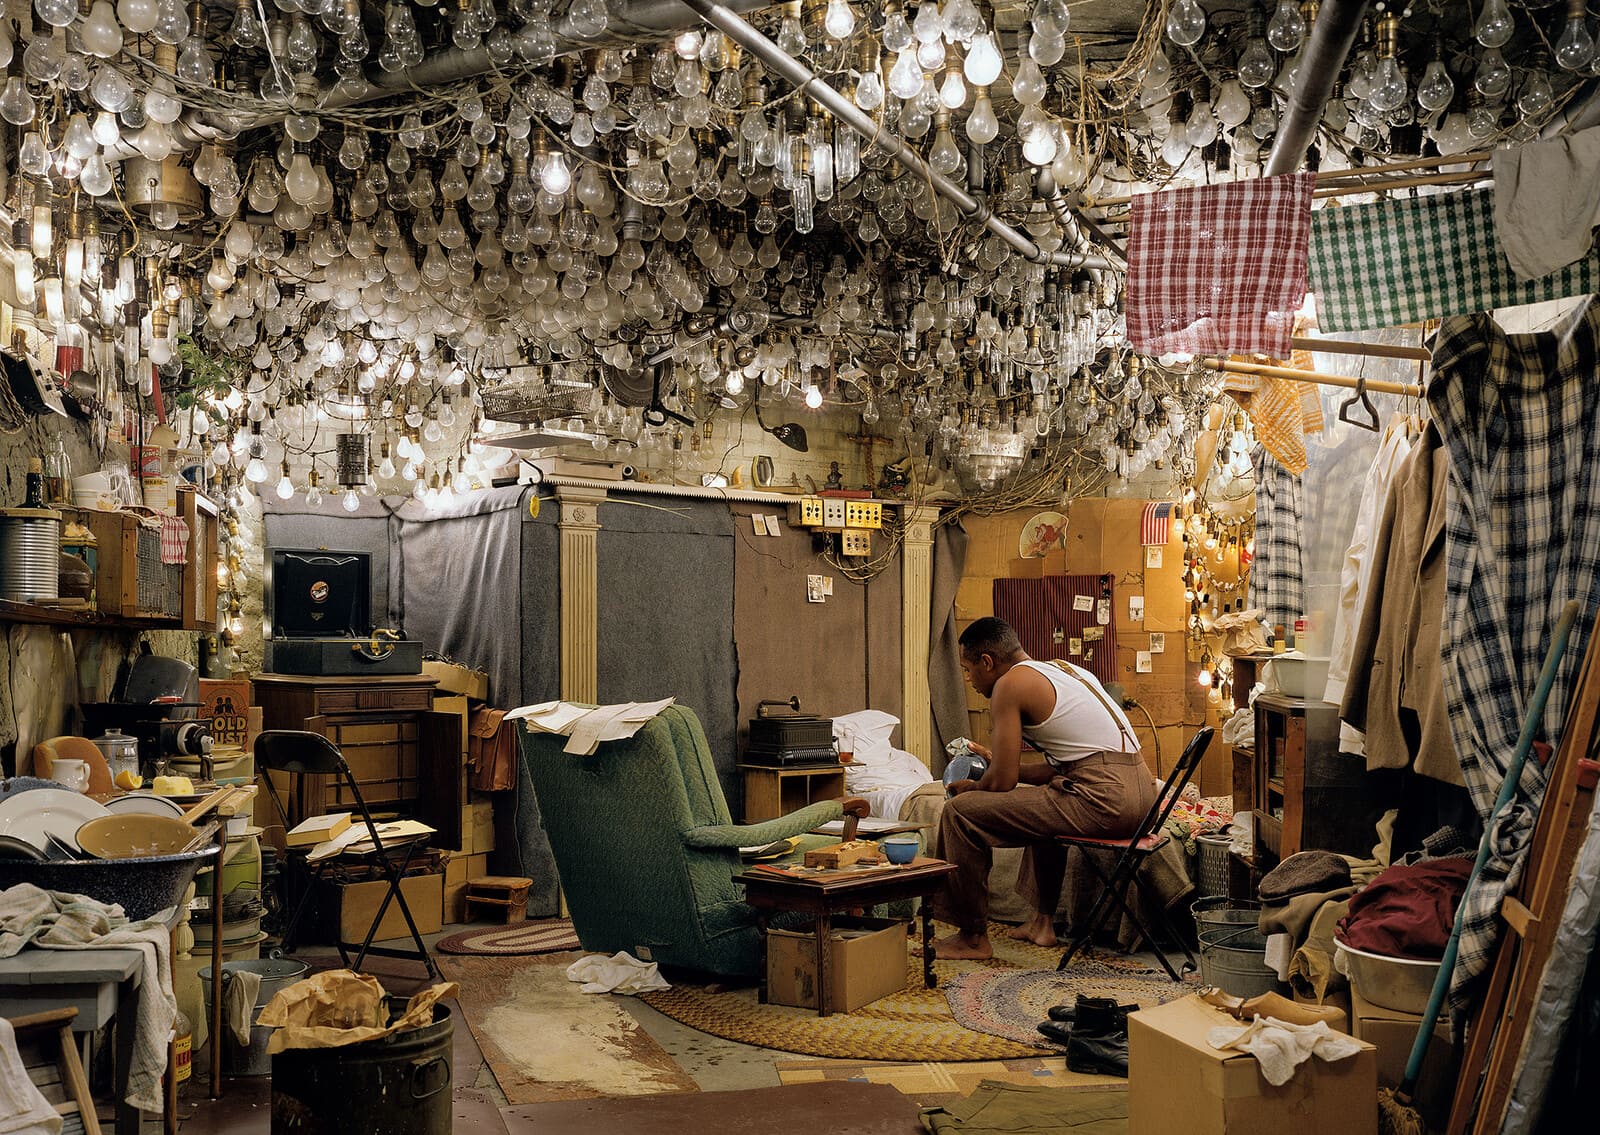 Jeff Wall, “After ‘Invisible Man’ by Ralph Ellison, the Prologue”, 1999-2001